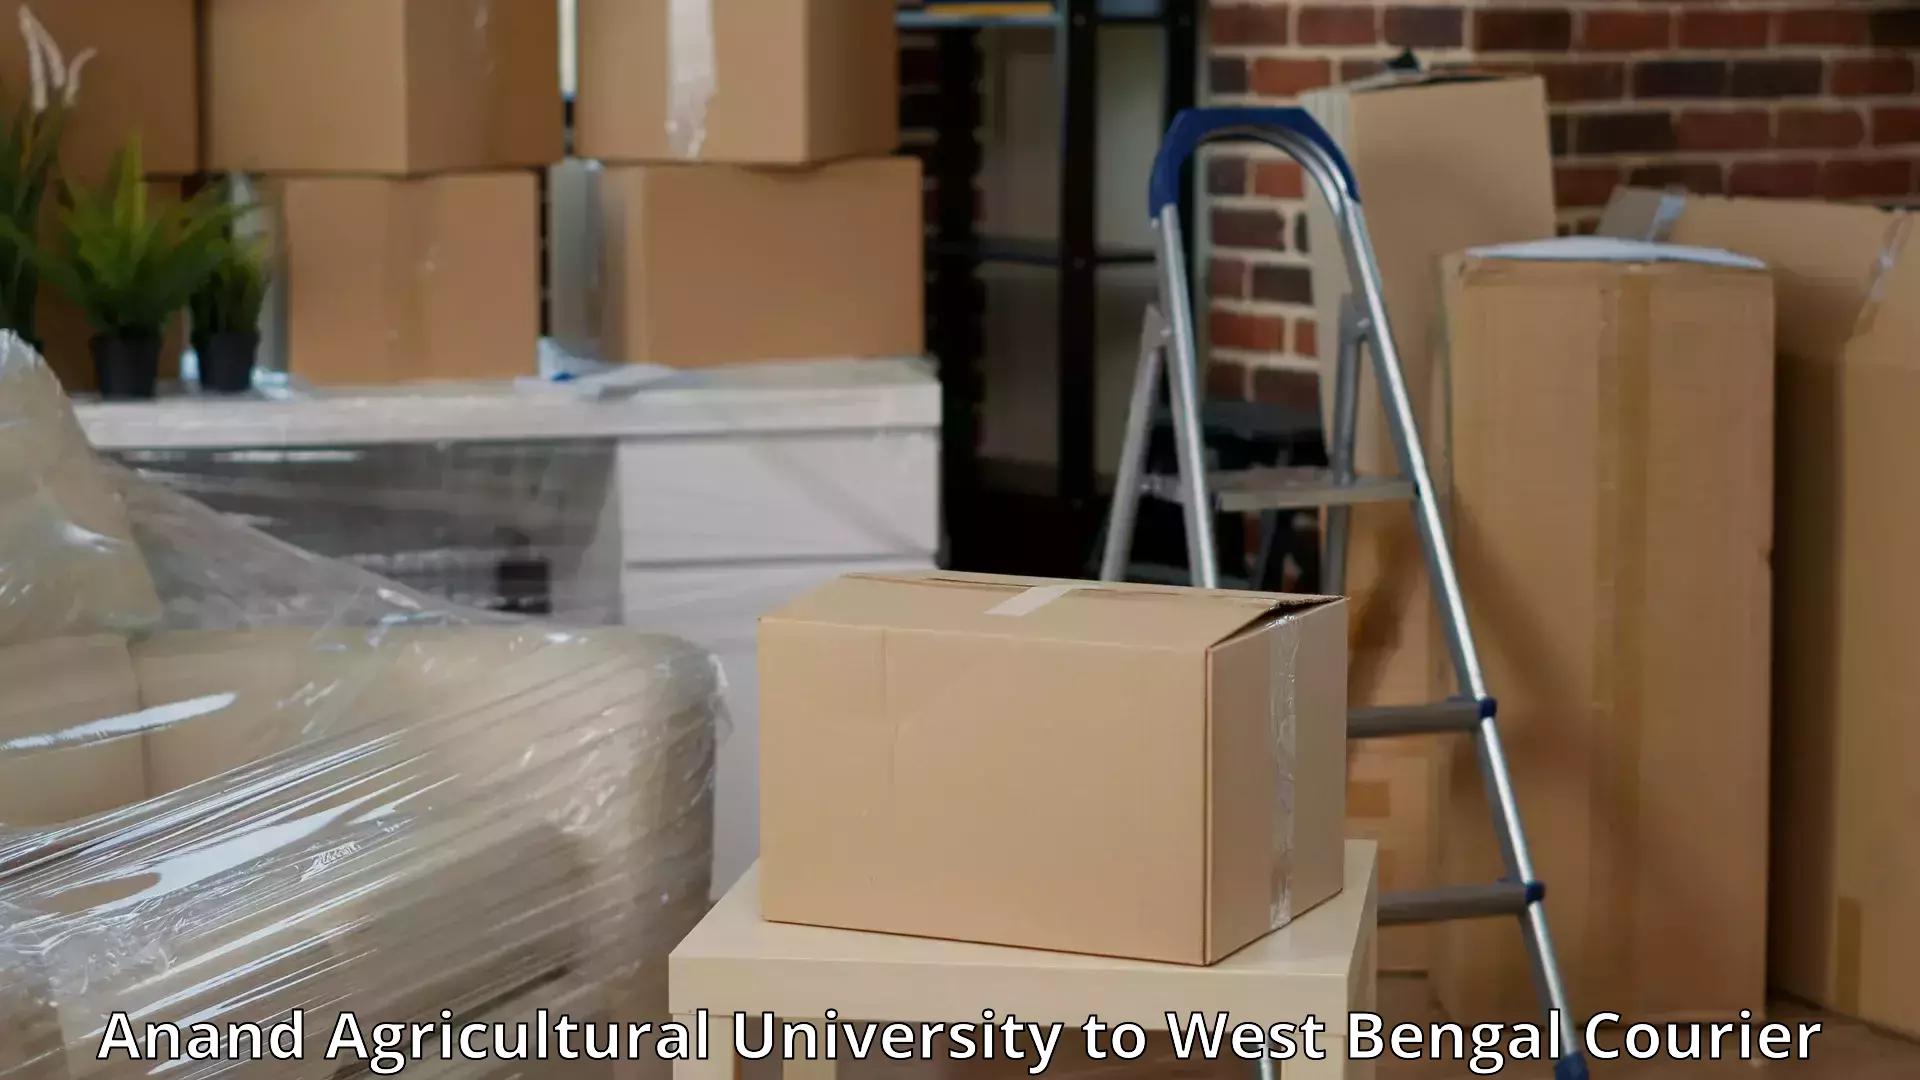 Furniture moving experts Anand Agricultural University to Budge Budge